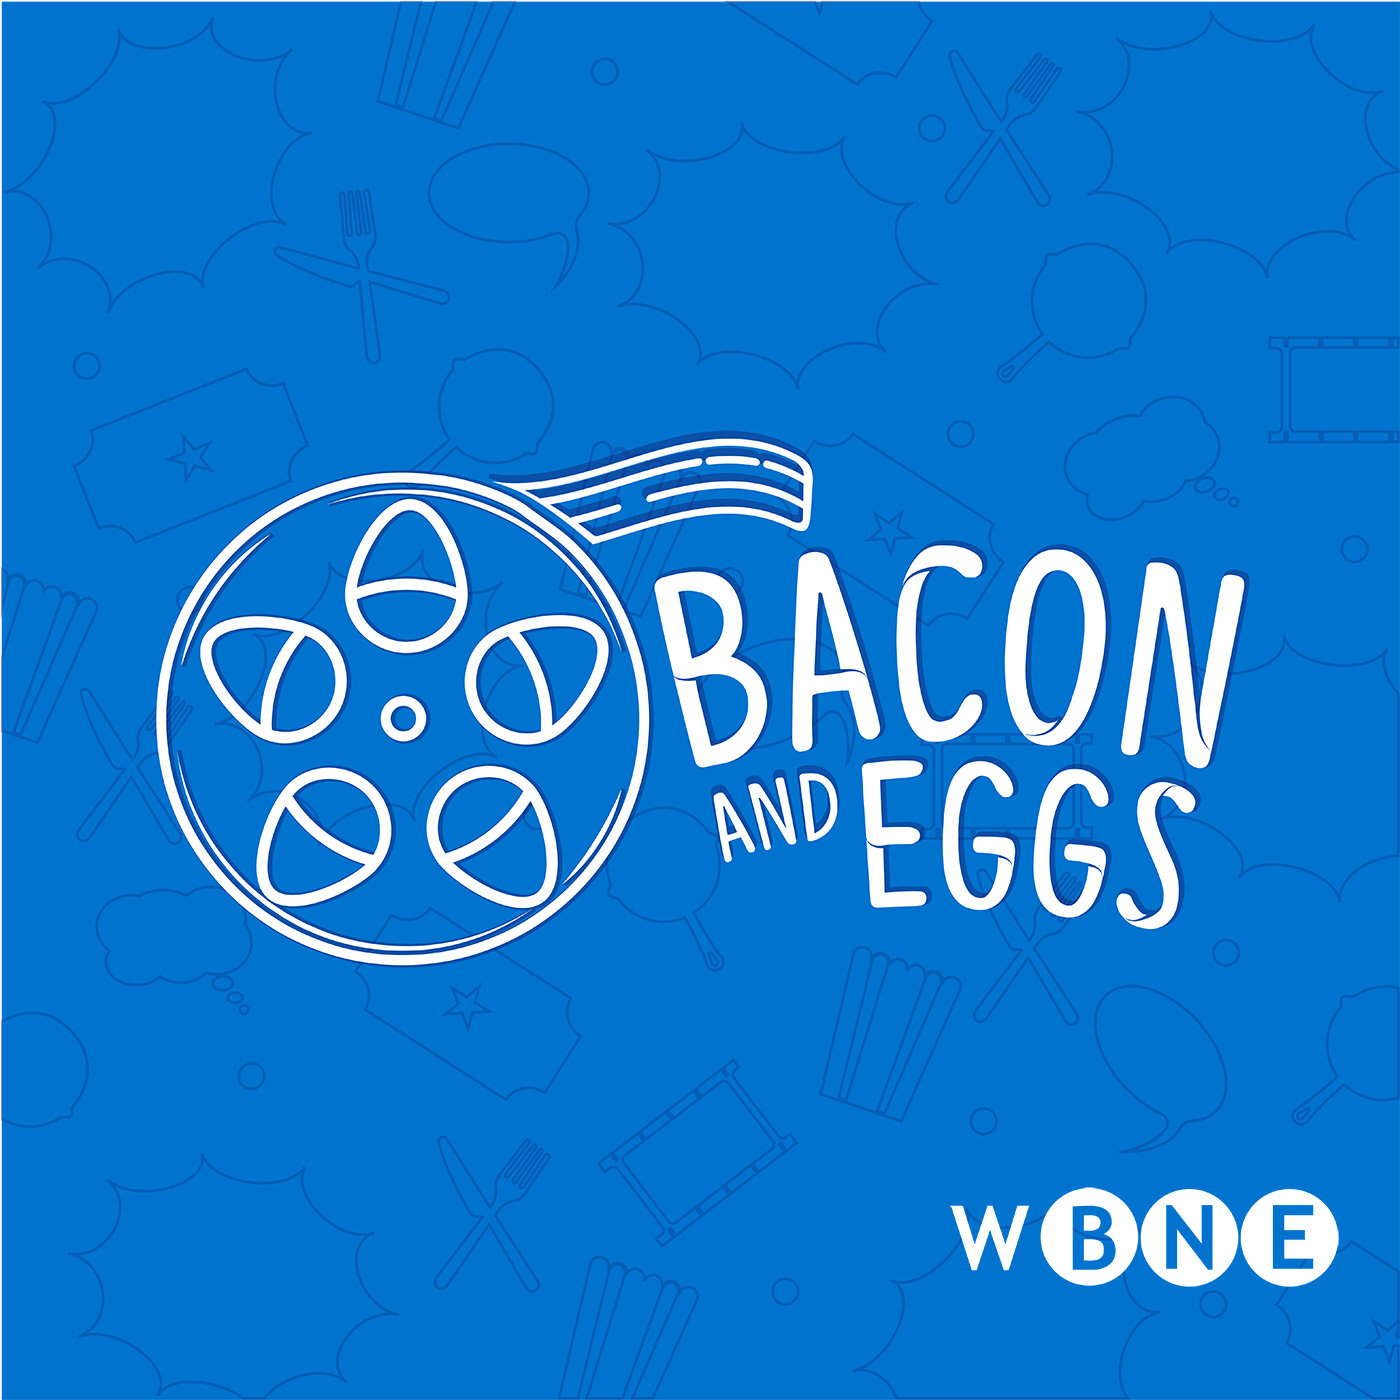  The Bacon and Eggs podcast logo/ cover art. The background is blue with faint illustrations of speech bubbles, utensils, and popcorn containers. On top is a movie reel that has holes in the shape of eggs. Next to that it says “BACON AND EGGS” in lar